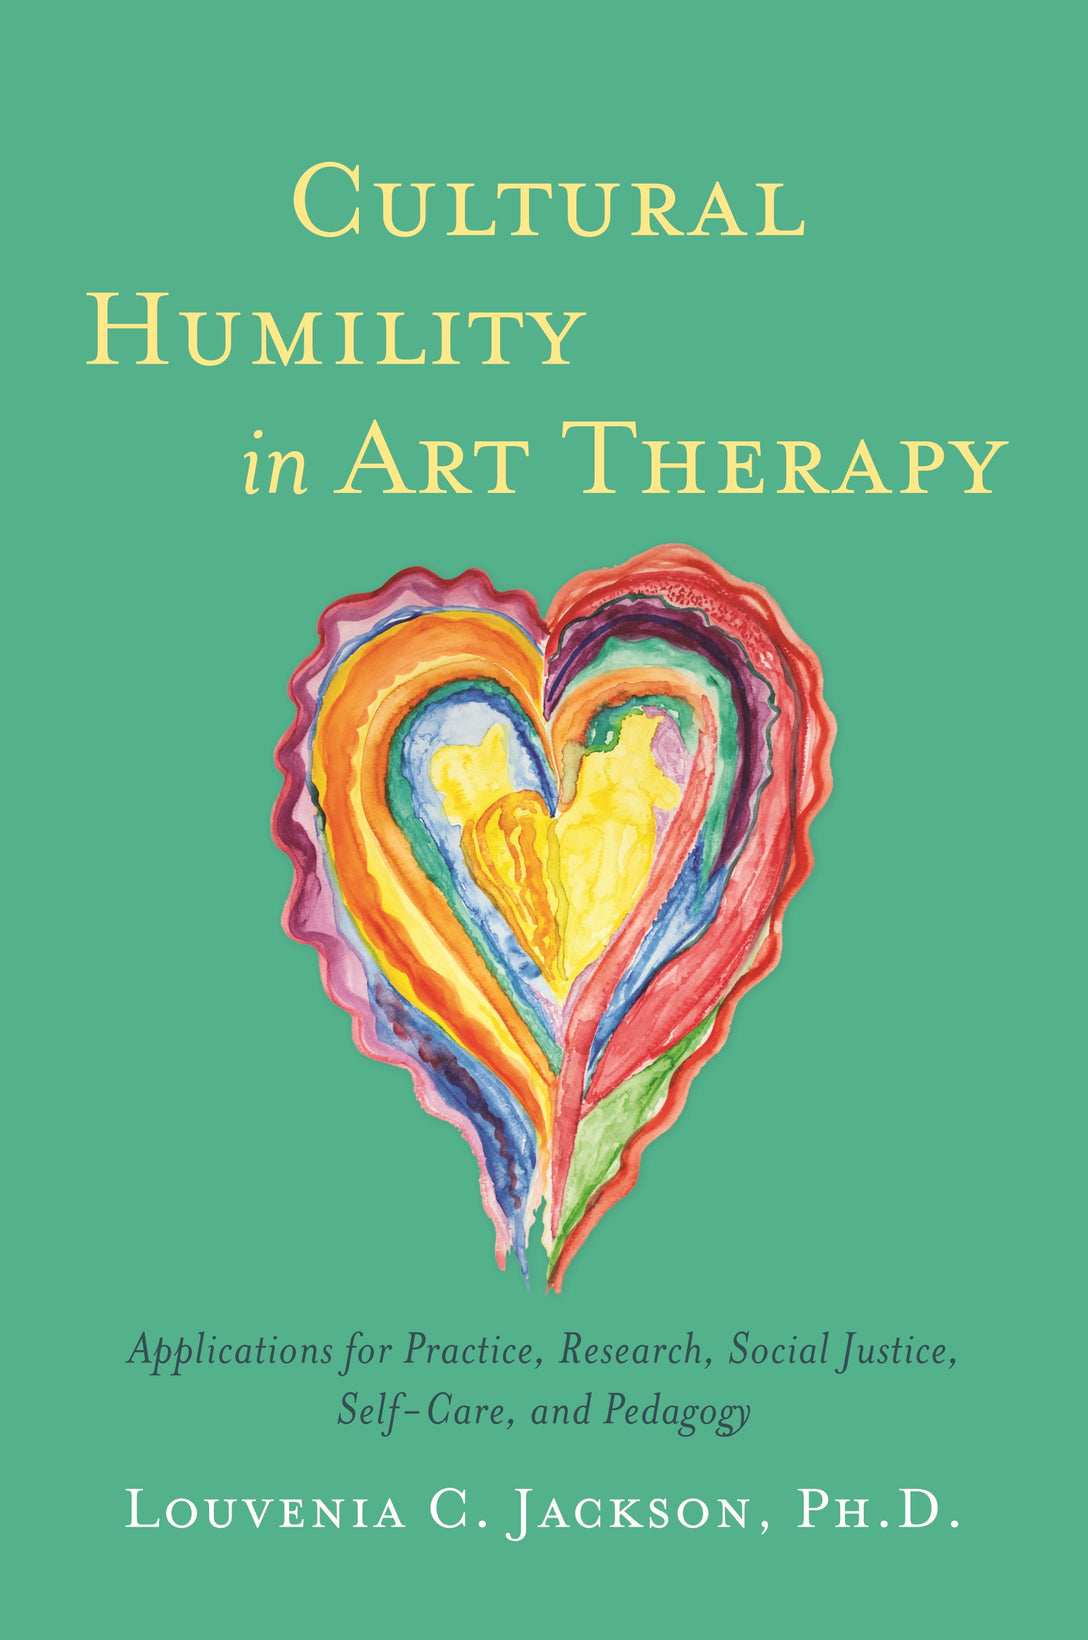 Cultural Humility in Art Therapy by Melanie Tervalon, Louvenia Jackson